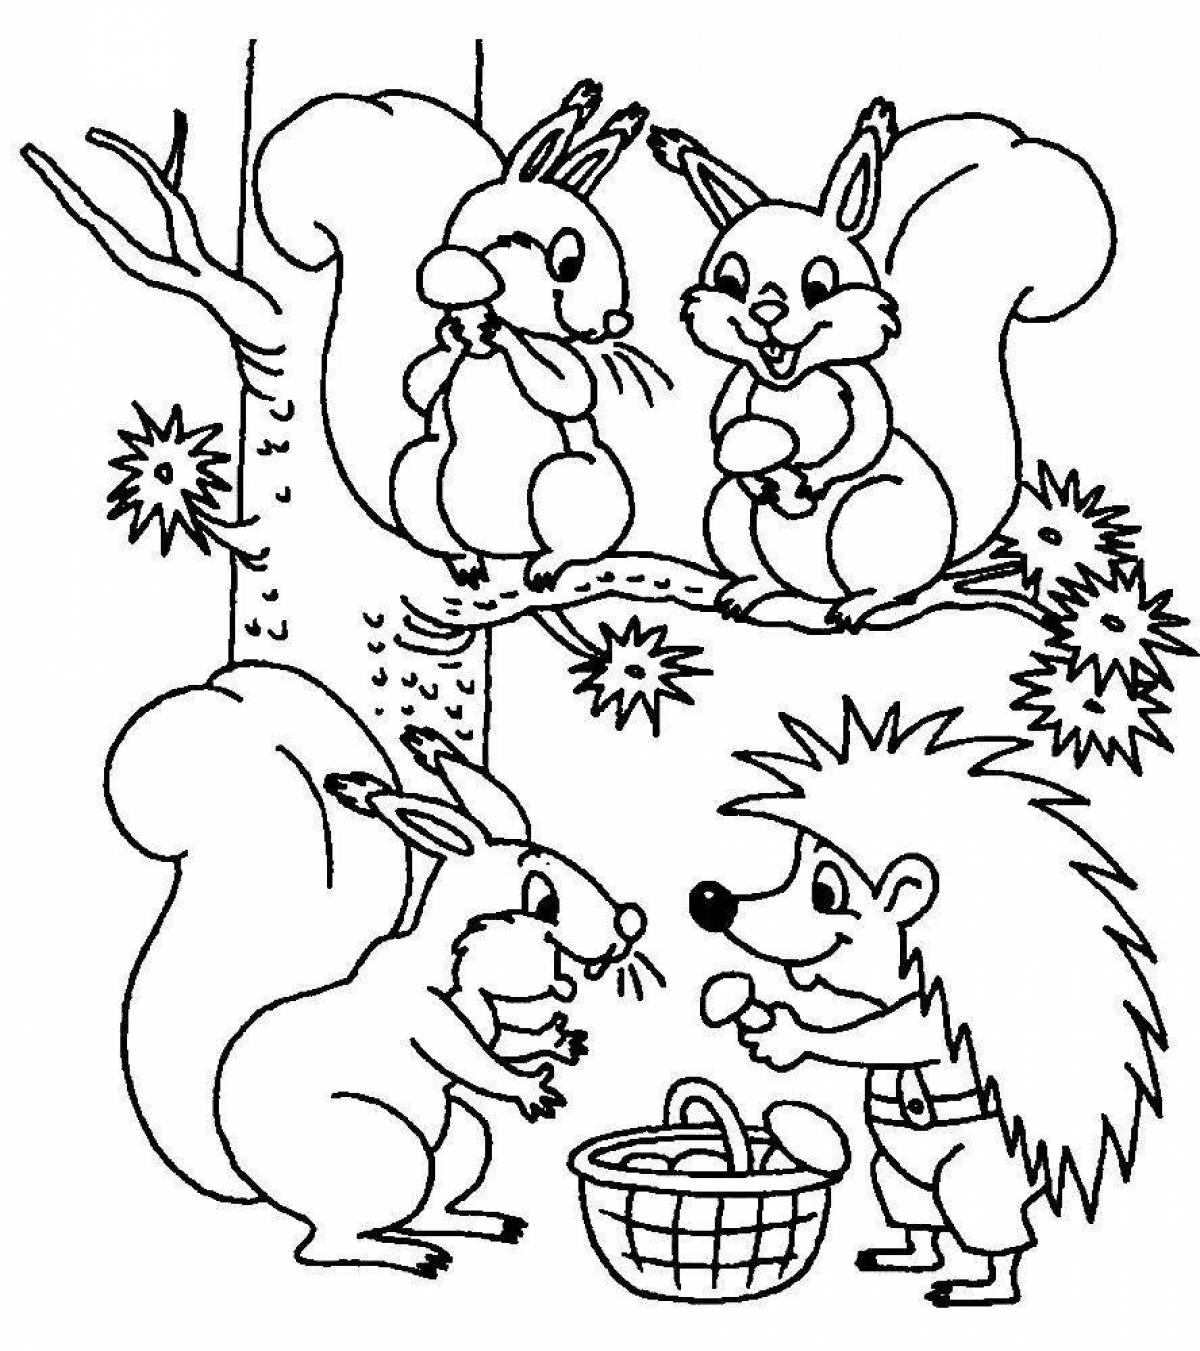 Colored forest animals for preschoolers